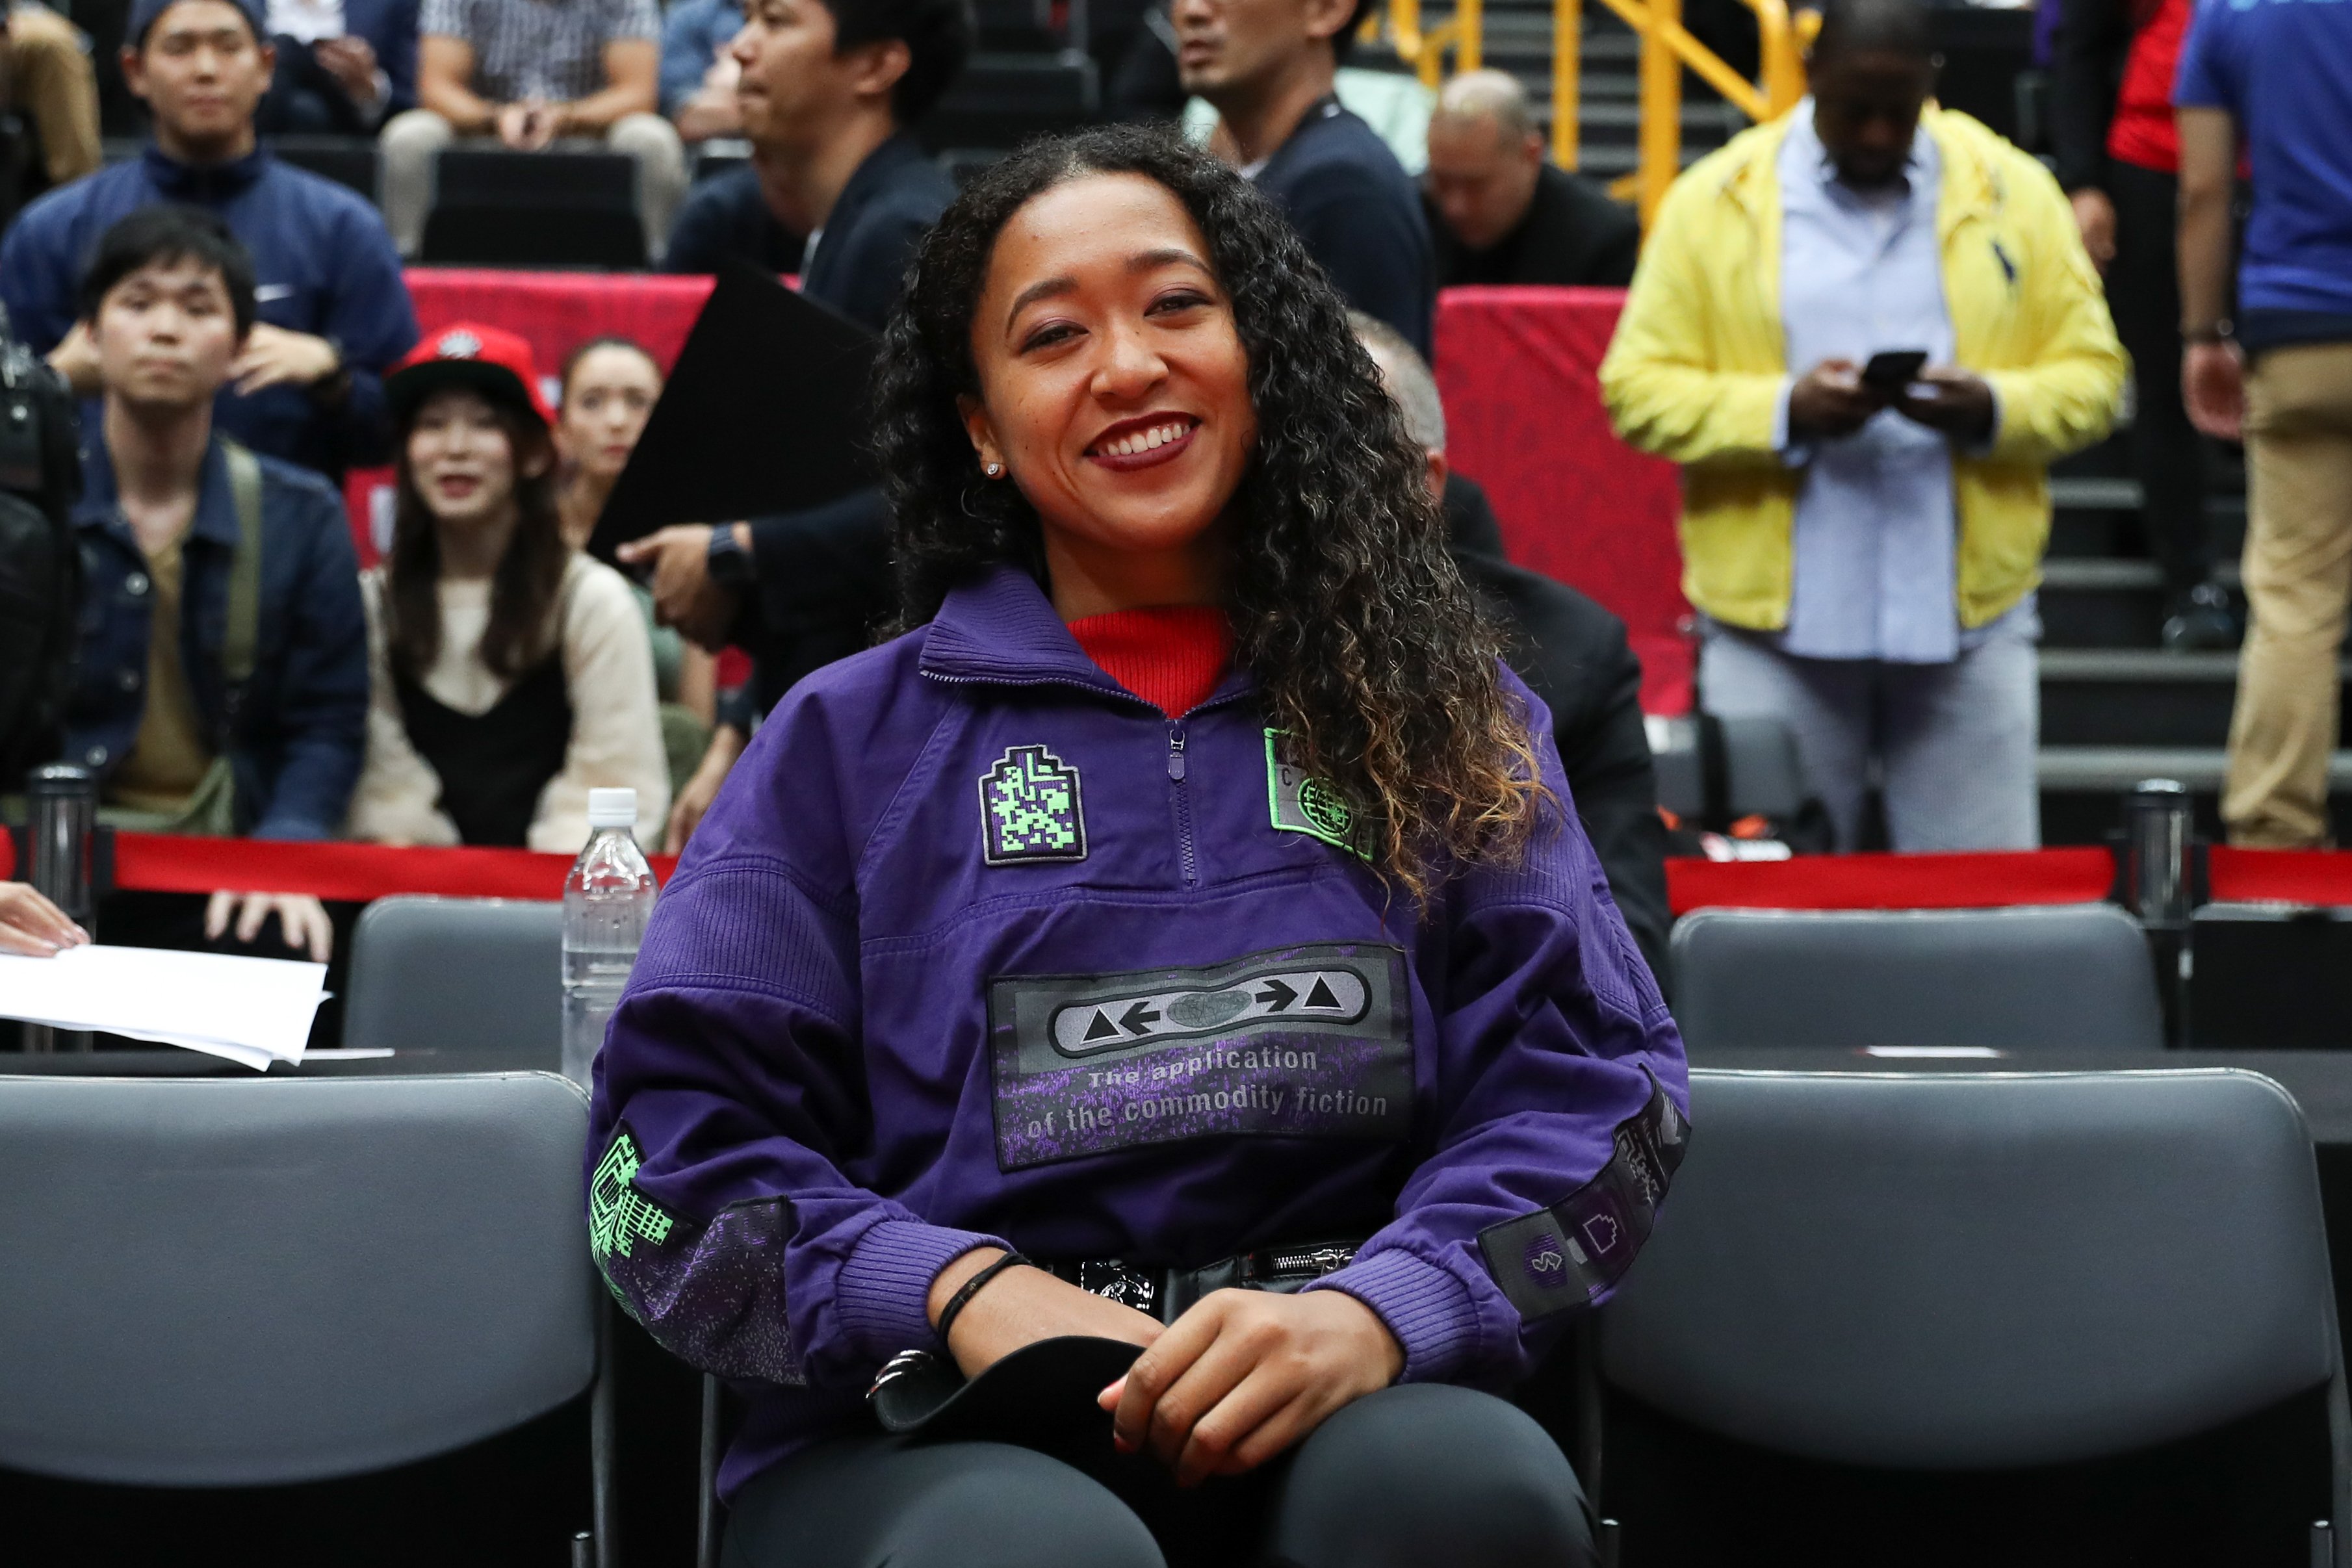 Tennis star Naomi Osaka poses for a photo before a match at Super Arena on October 10, 2019 in Saitama, Japan | Photo: Getty Images